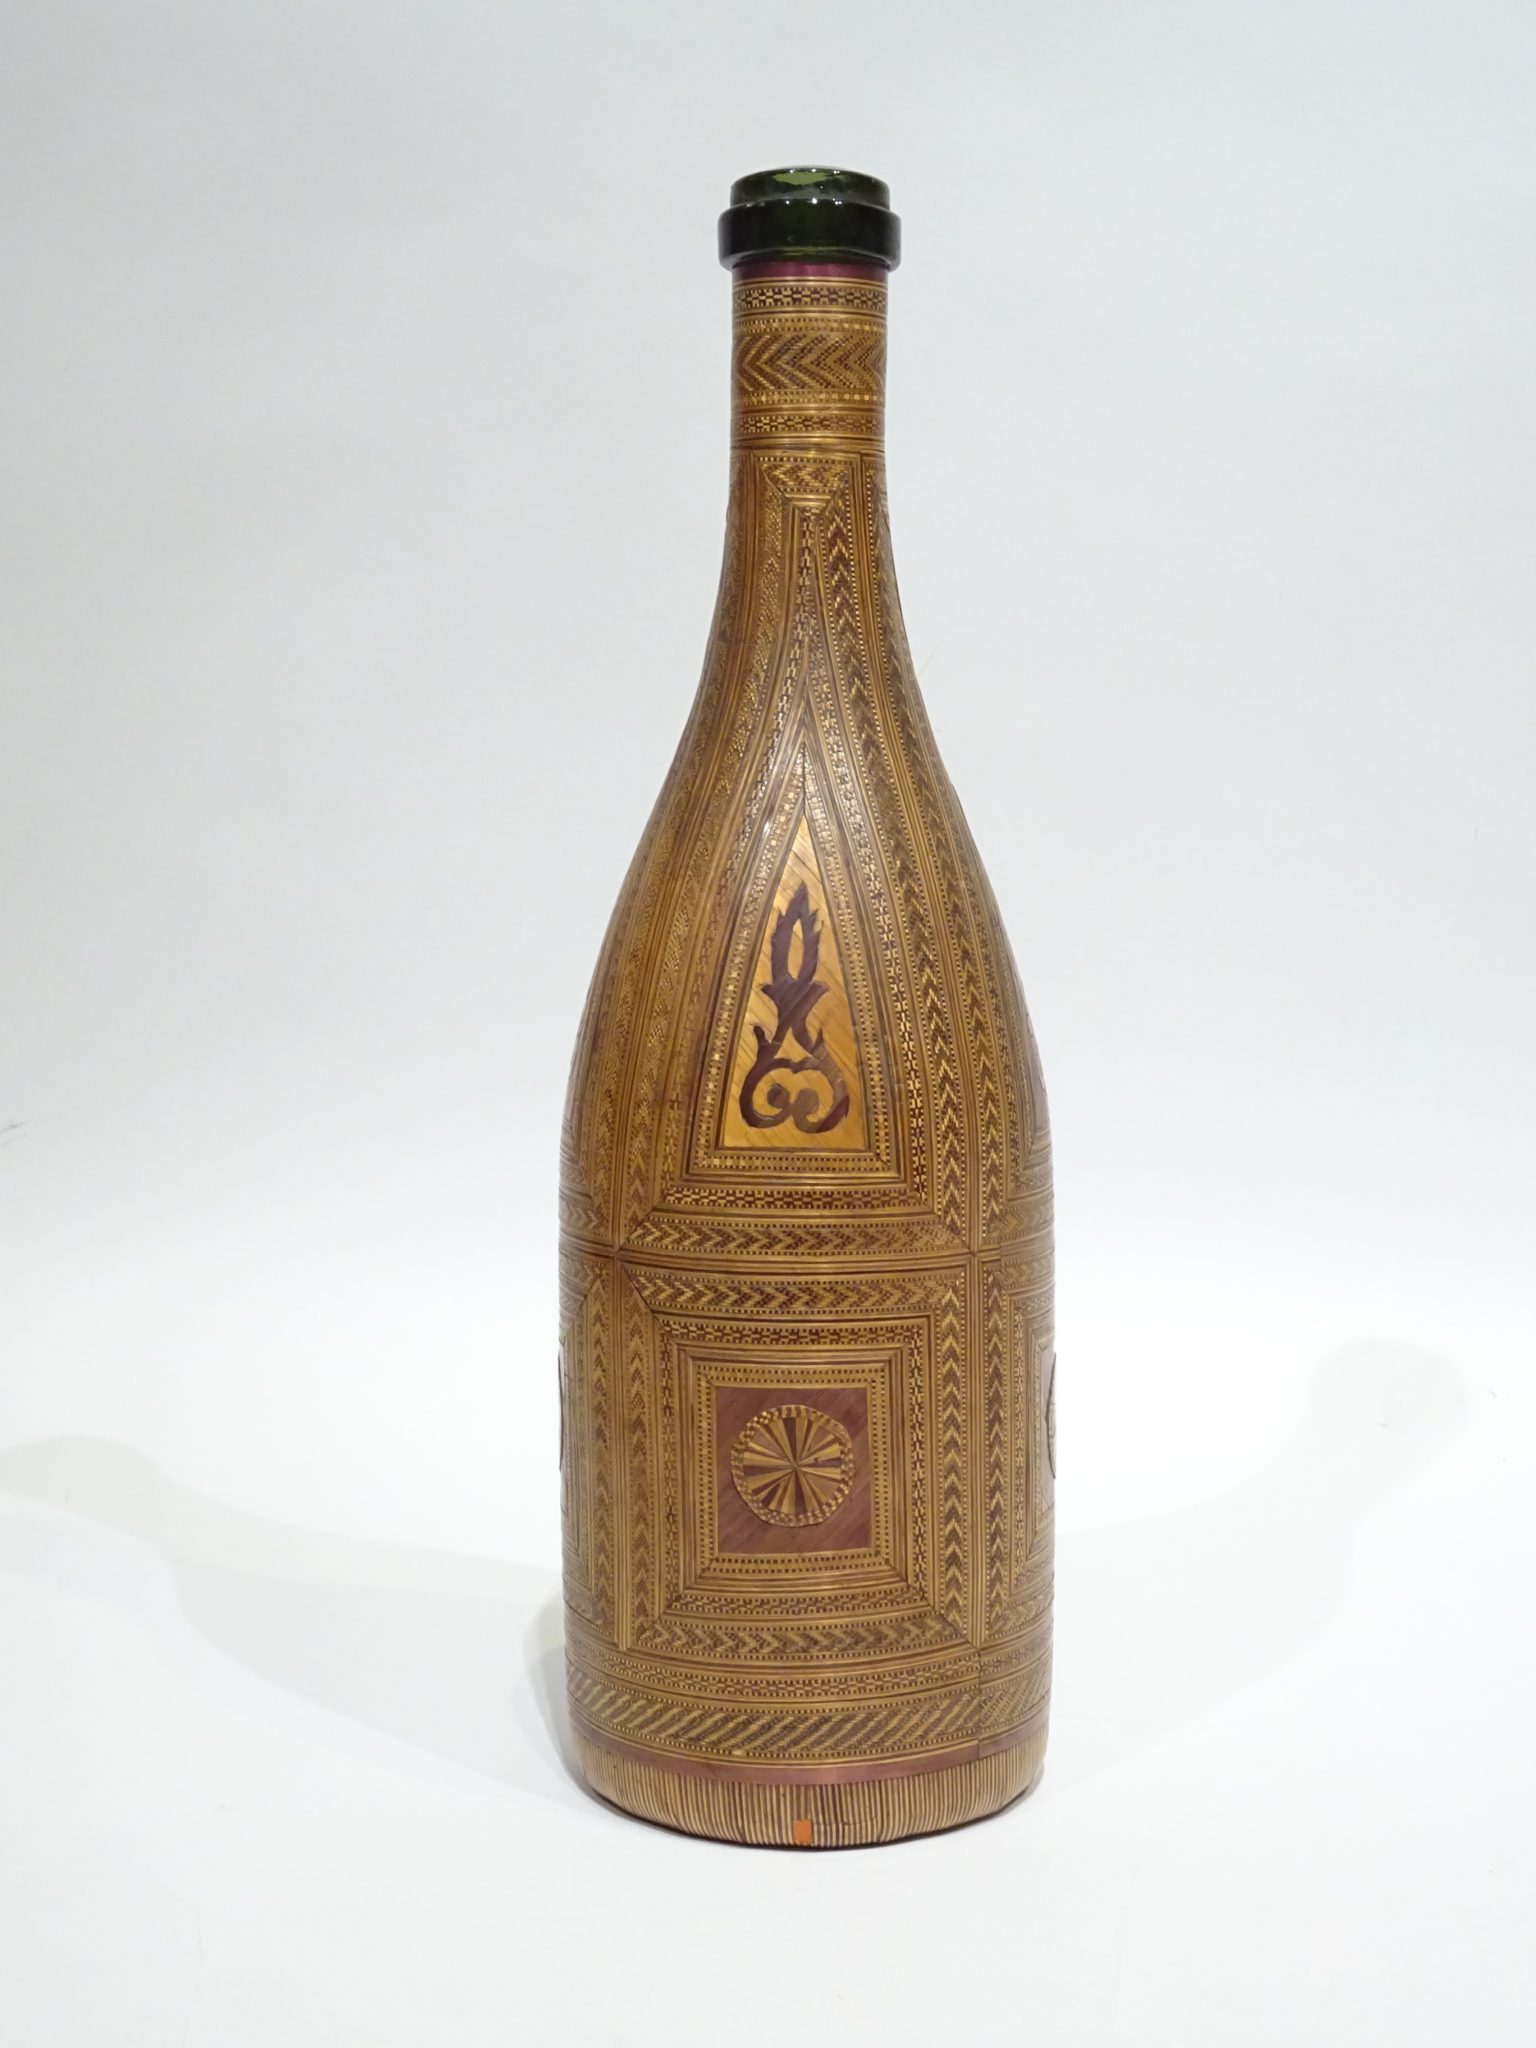 Straw and Glass bottle – POW work – early 19th century